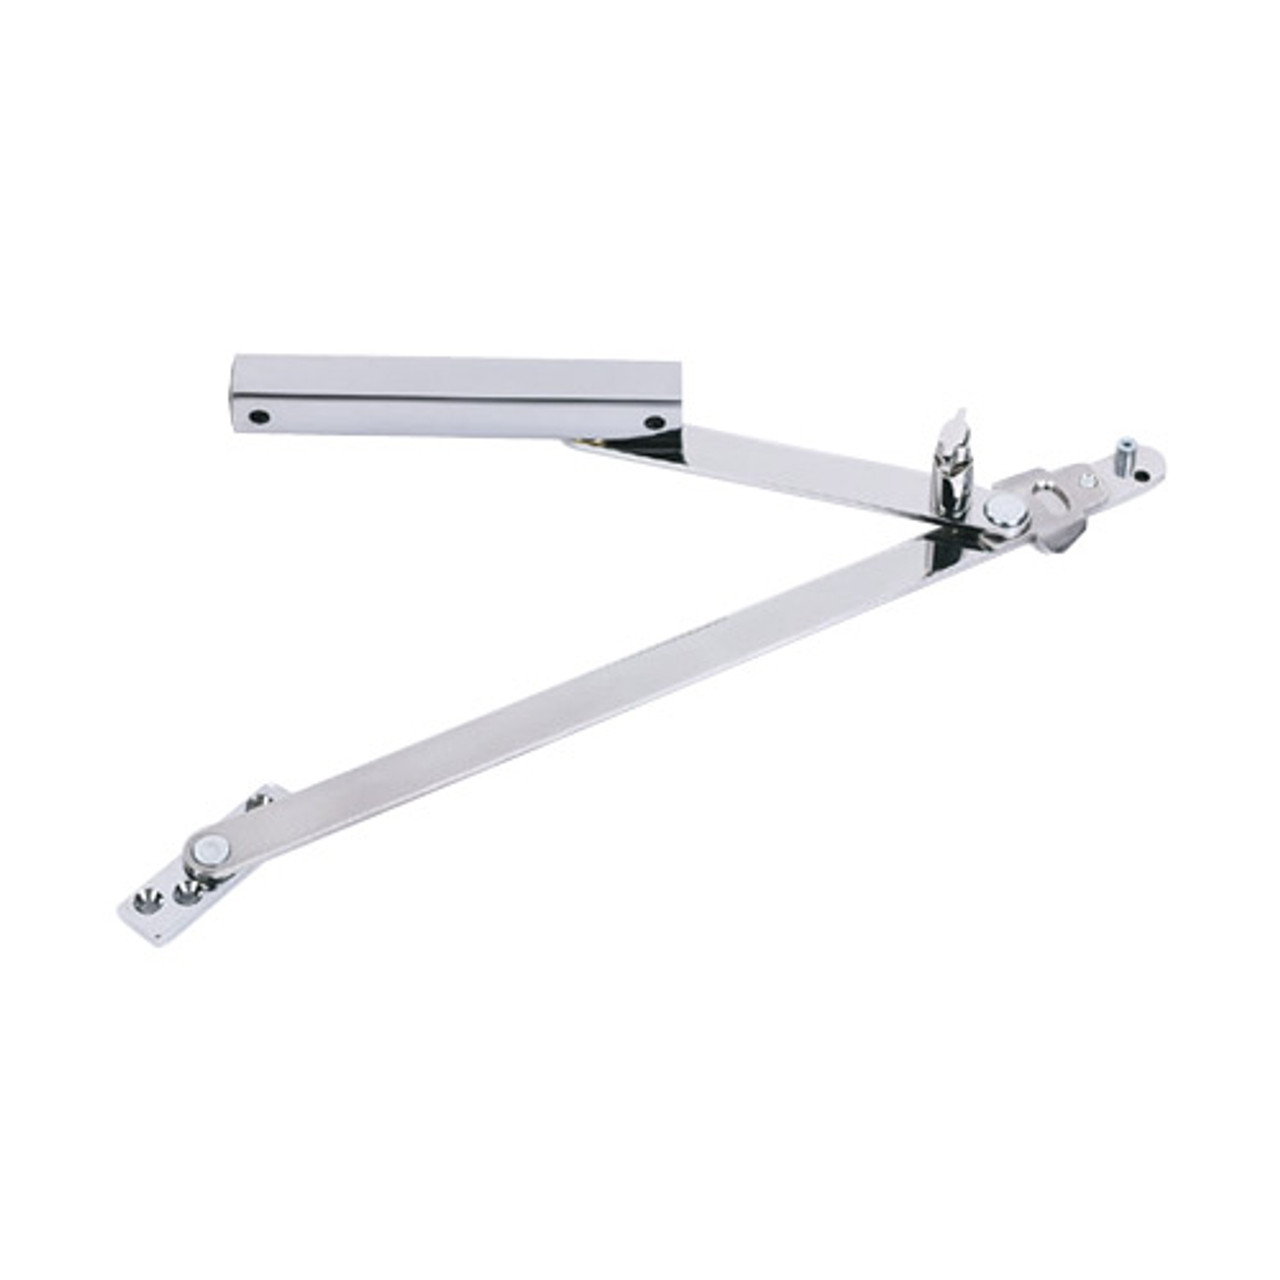 815H-US32-SHIM-2 Glynn Johnson 81 Series Heavy Duty Surface Overhead in Bright Stainless Steel